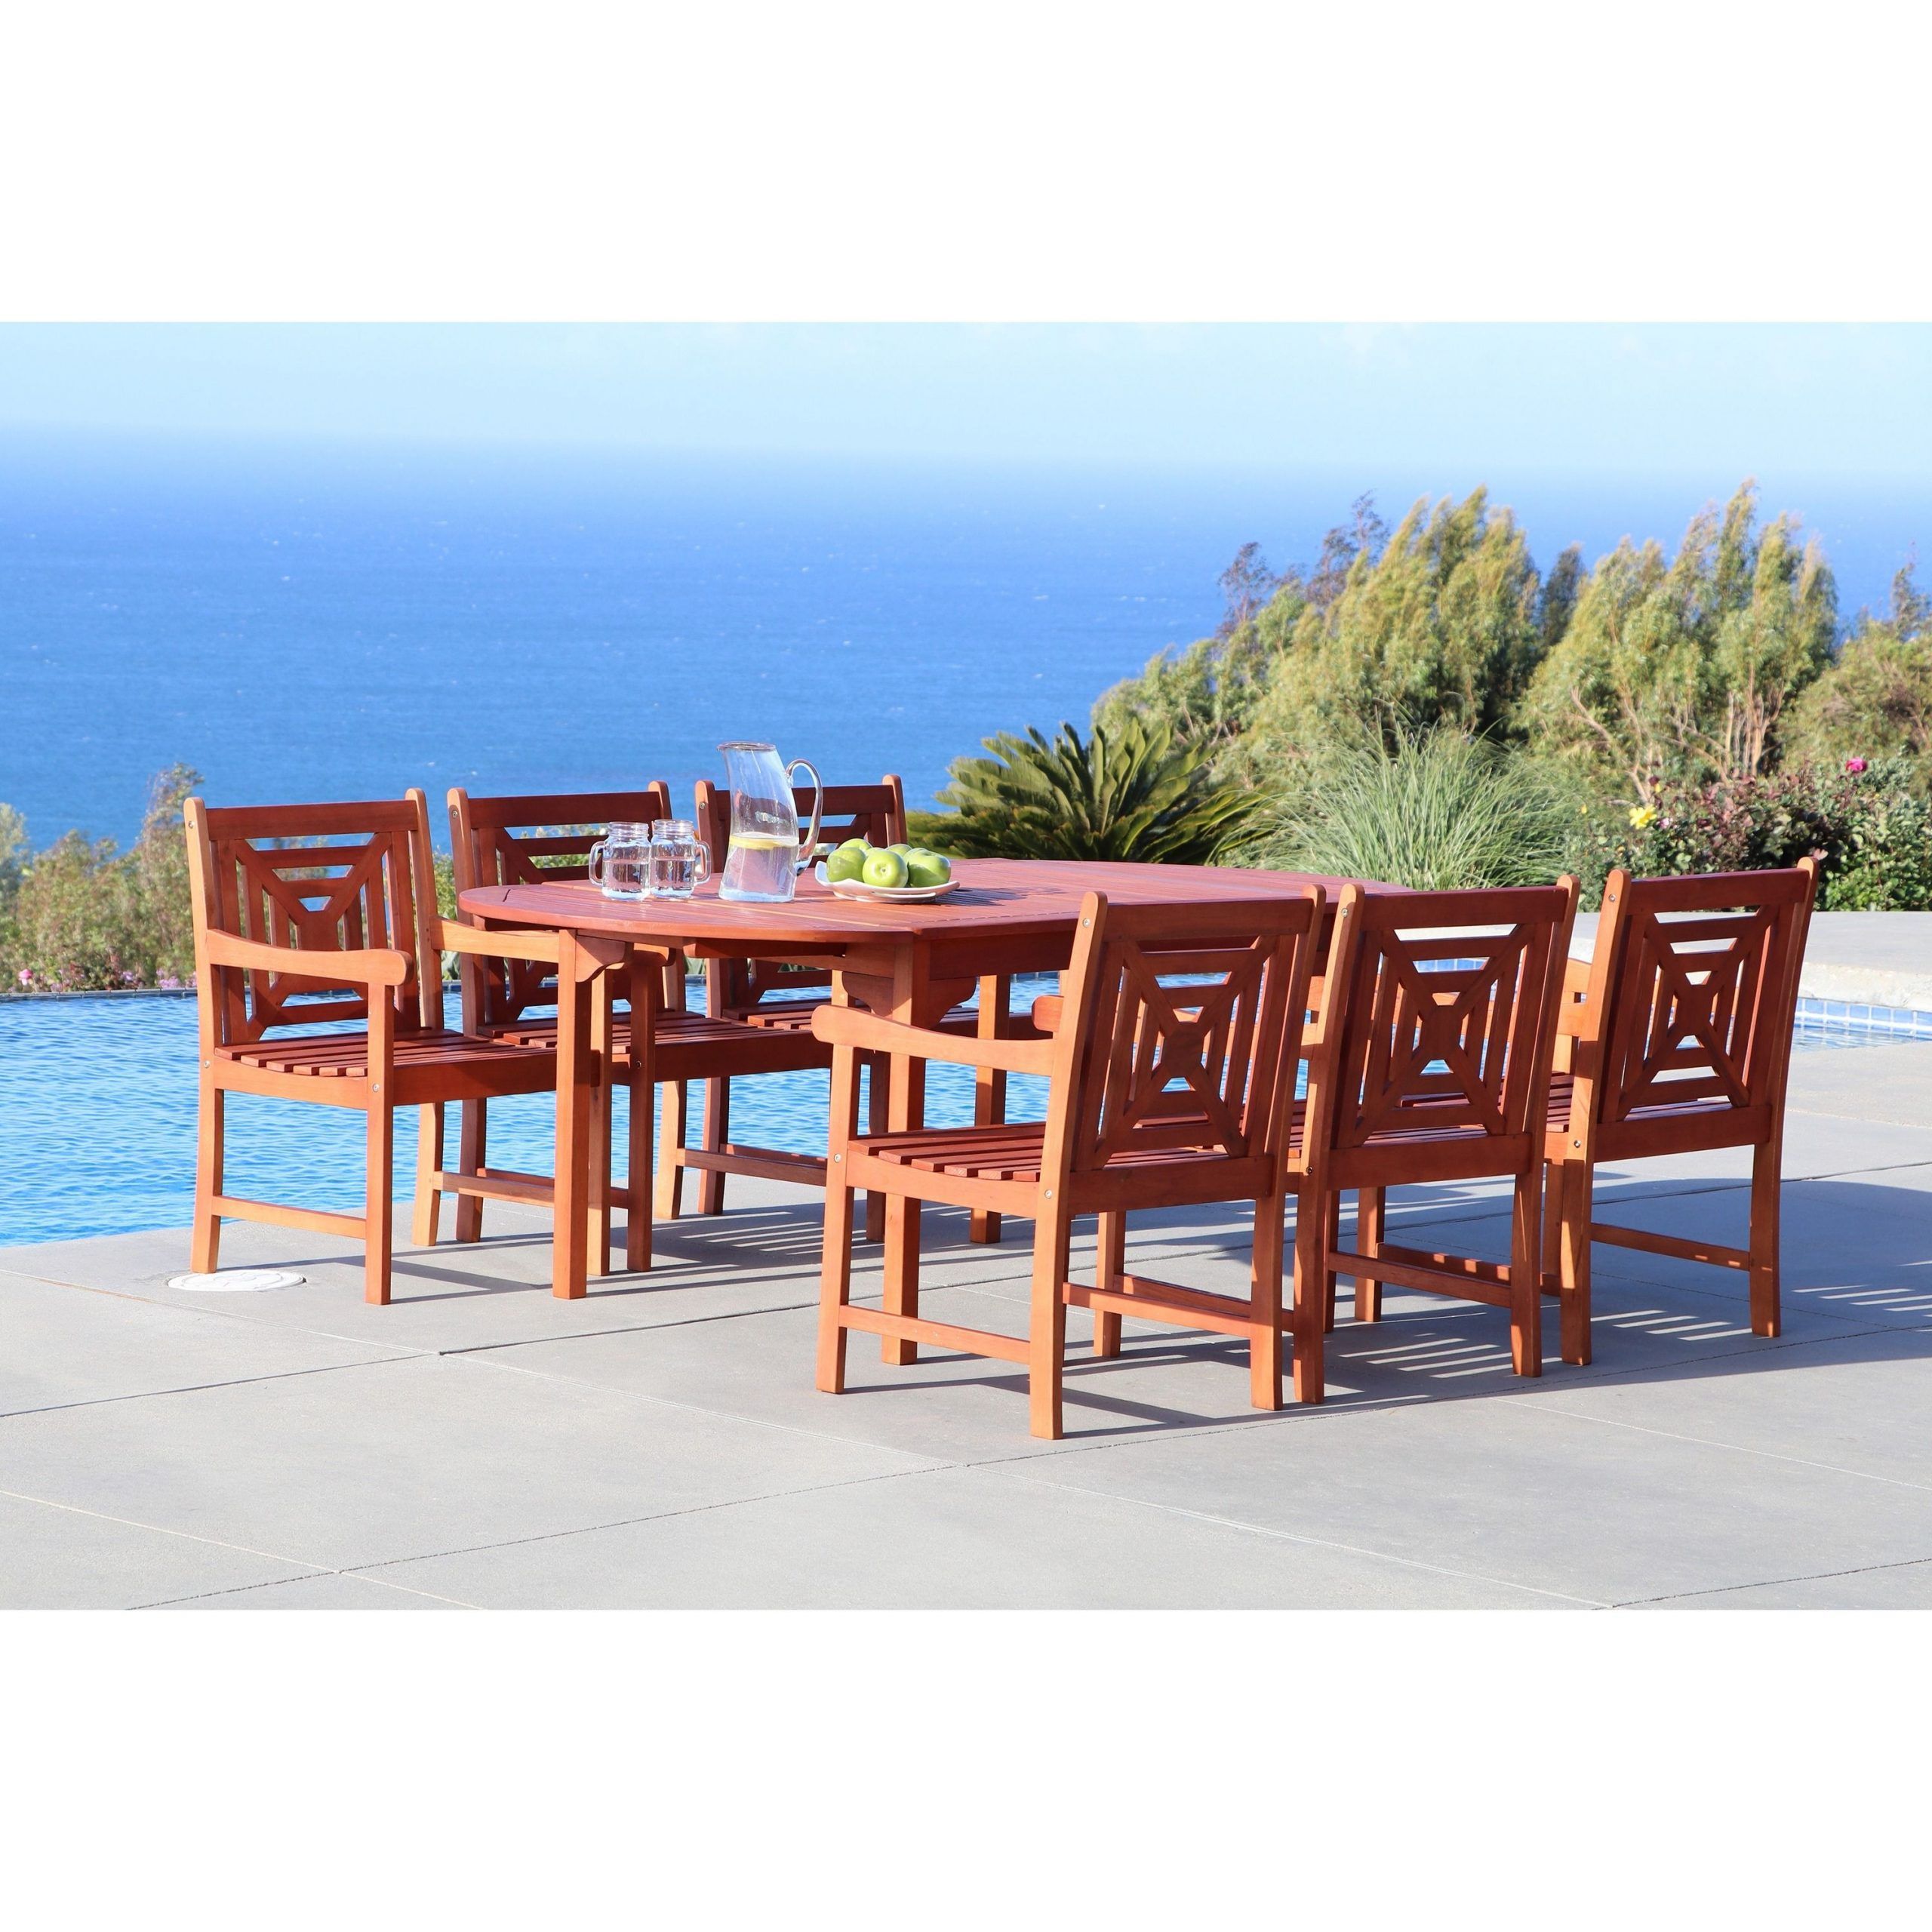 Malibu Eco Friendly 7 Piece Outdoor Hardwood Dining Set With Oval With Most Recently Released Oval 7 Piece Outdoor Patio Dining Sets (View 4 of 15)